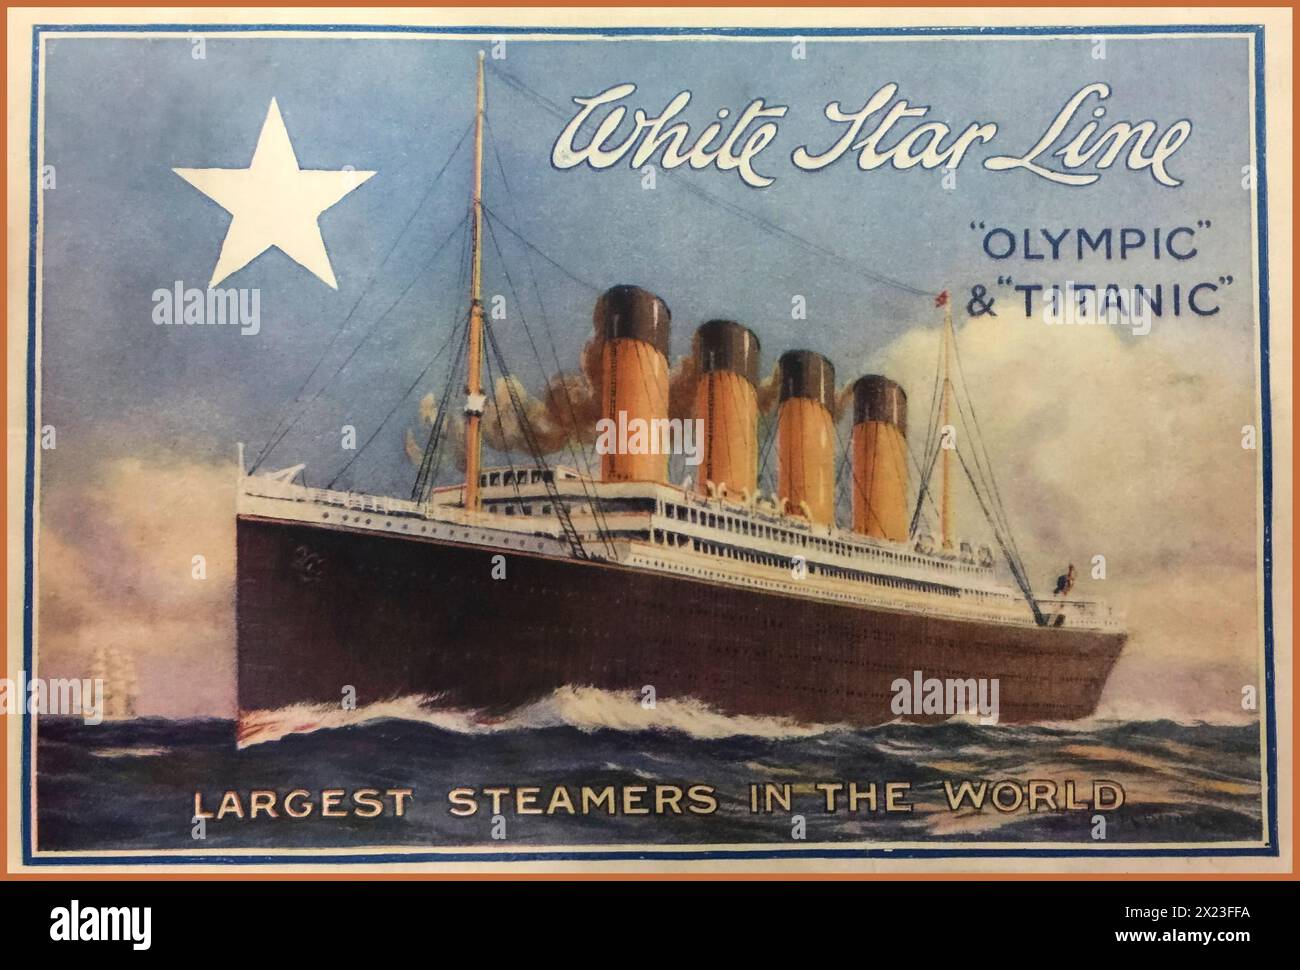 Vintage RMS Titanic/Olympic Ocean Liners 1910 brochure cover and poster 'WHITE STAR LINE' Largest Steamers in The World Stock Photo